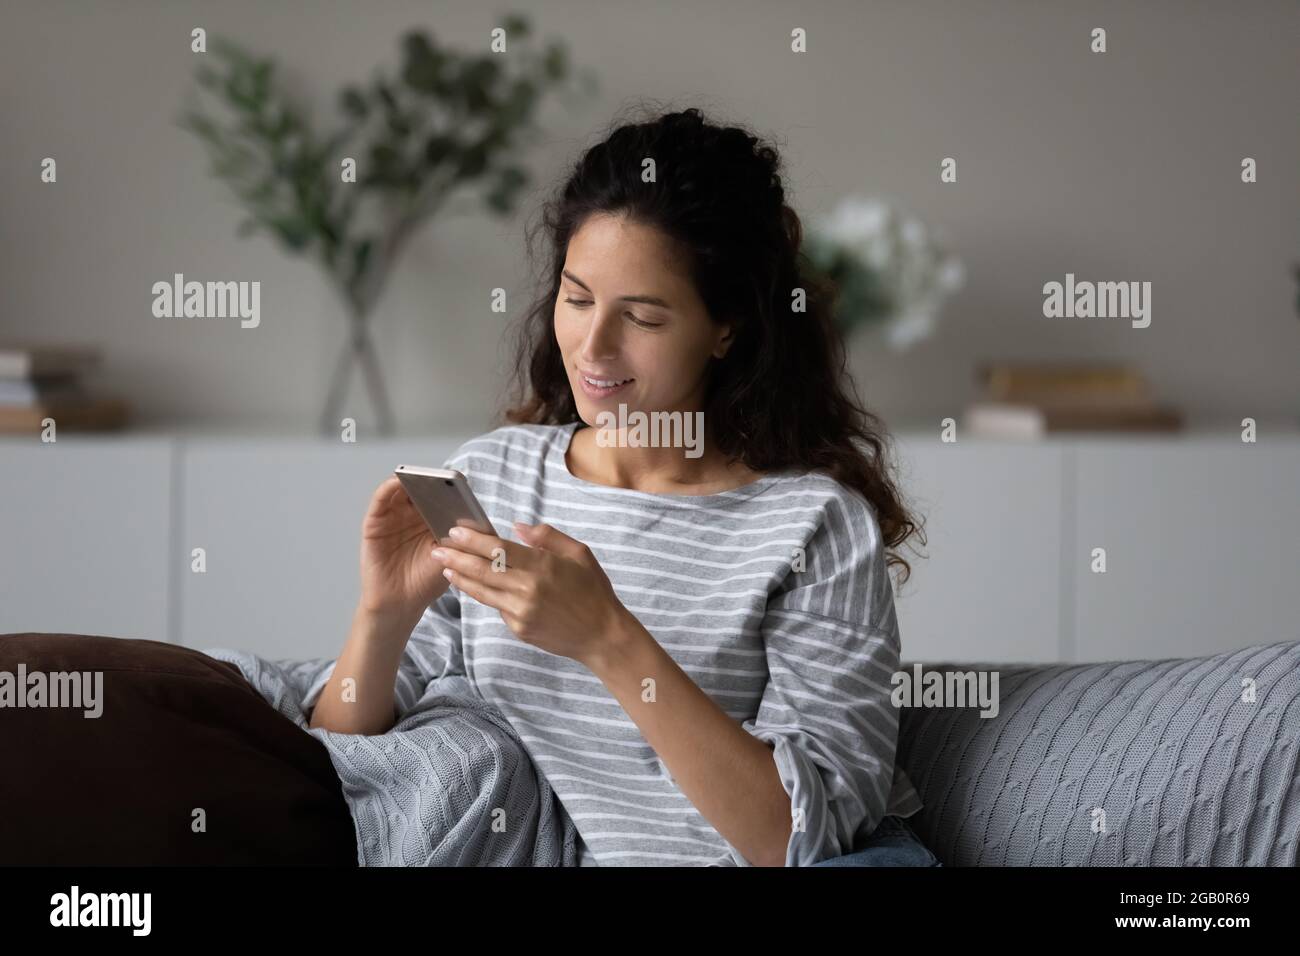 Satisfied mobile phone user receiving message with good news Stock Photo